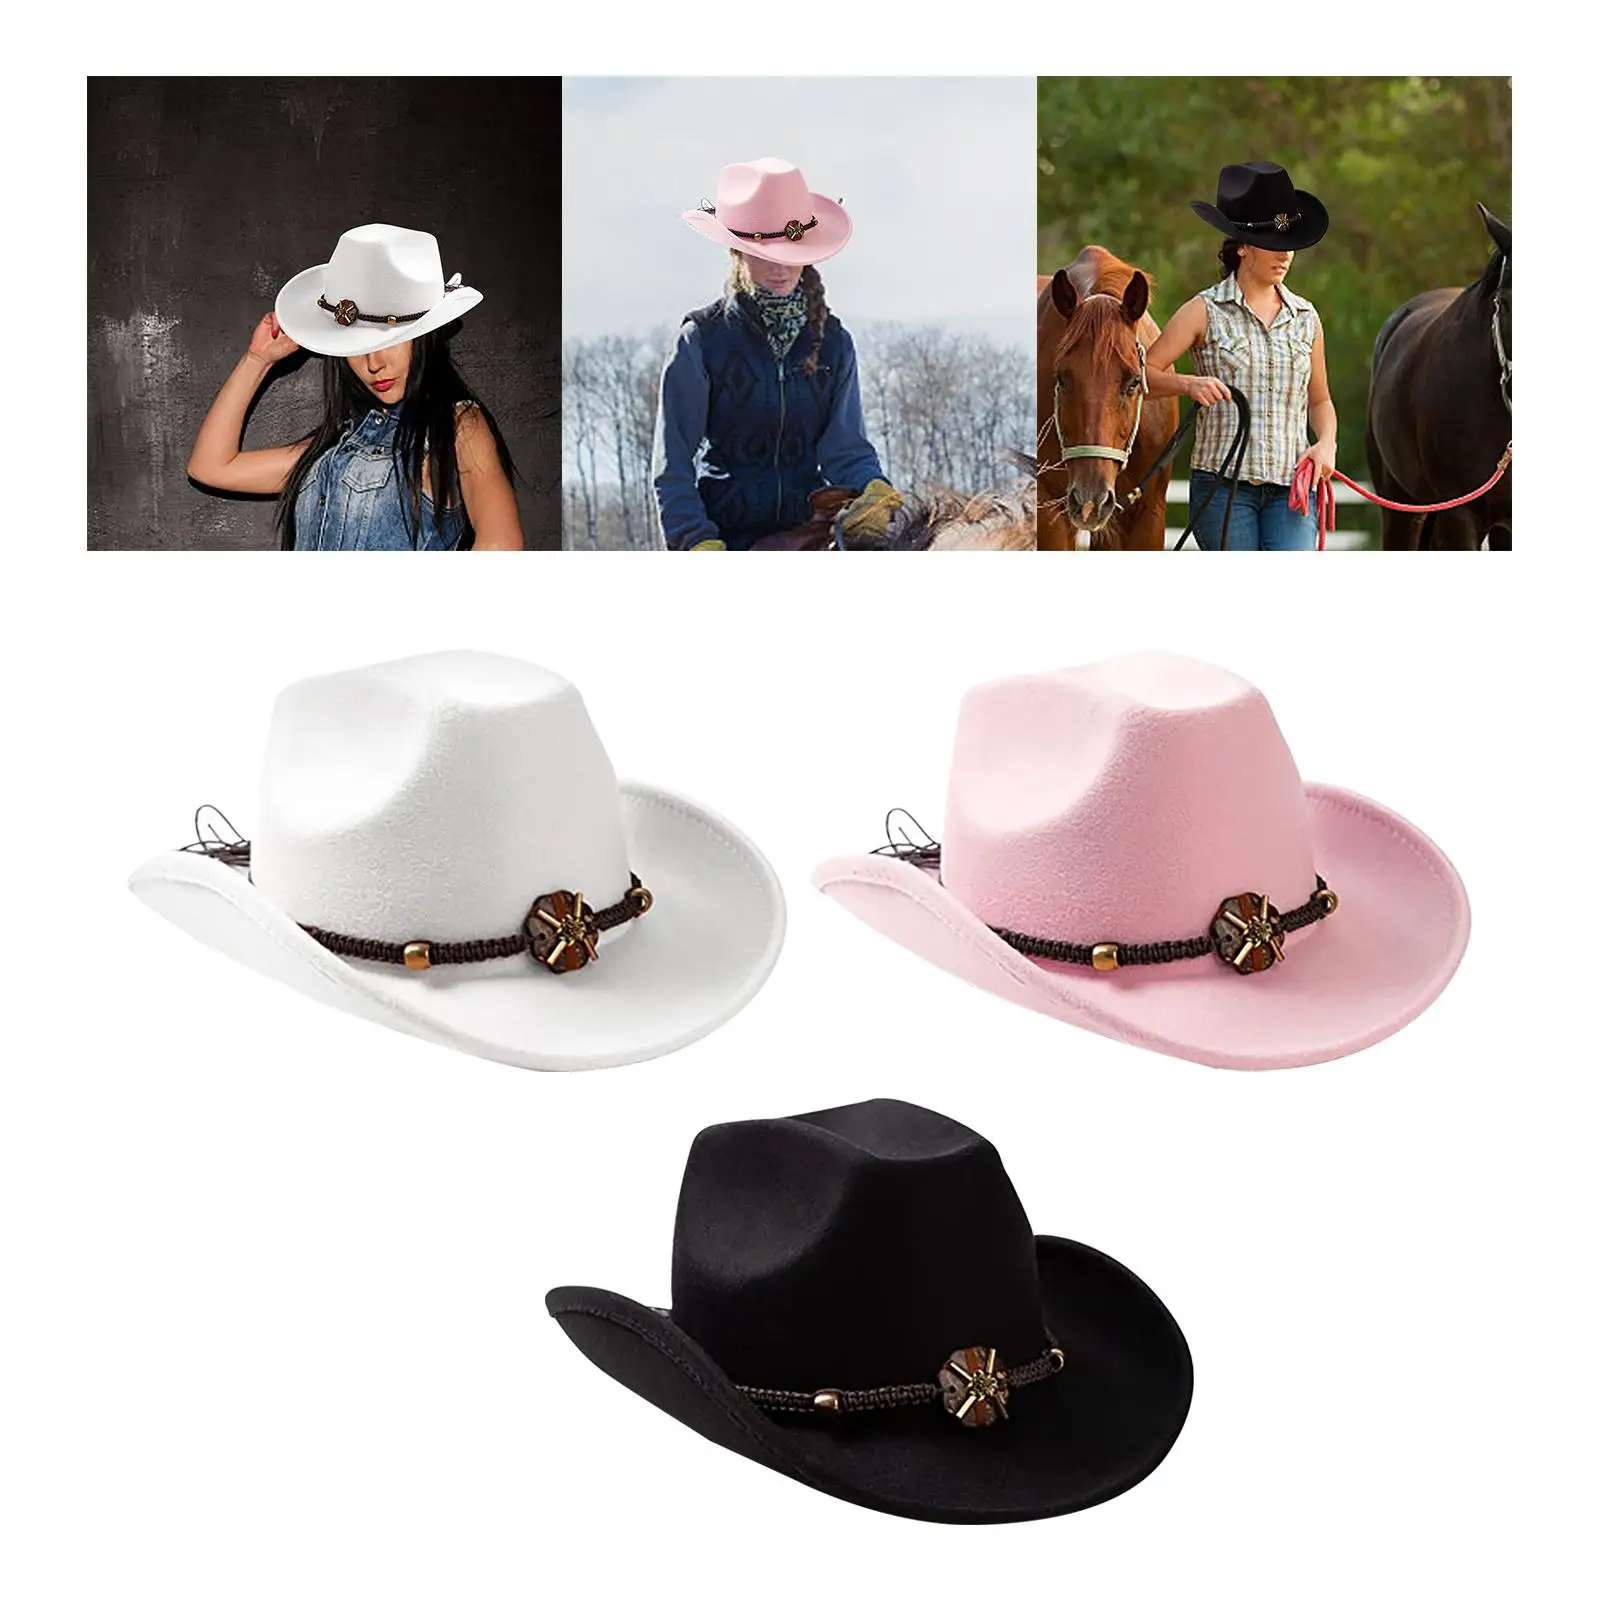 Classic Western Cowboy Hat Sun Hats Cosplay Props Big Brim Fancy Dress Costume Sunshade for Teens Adults Party Dress up Fishing